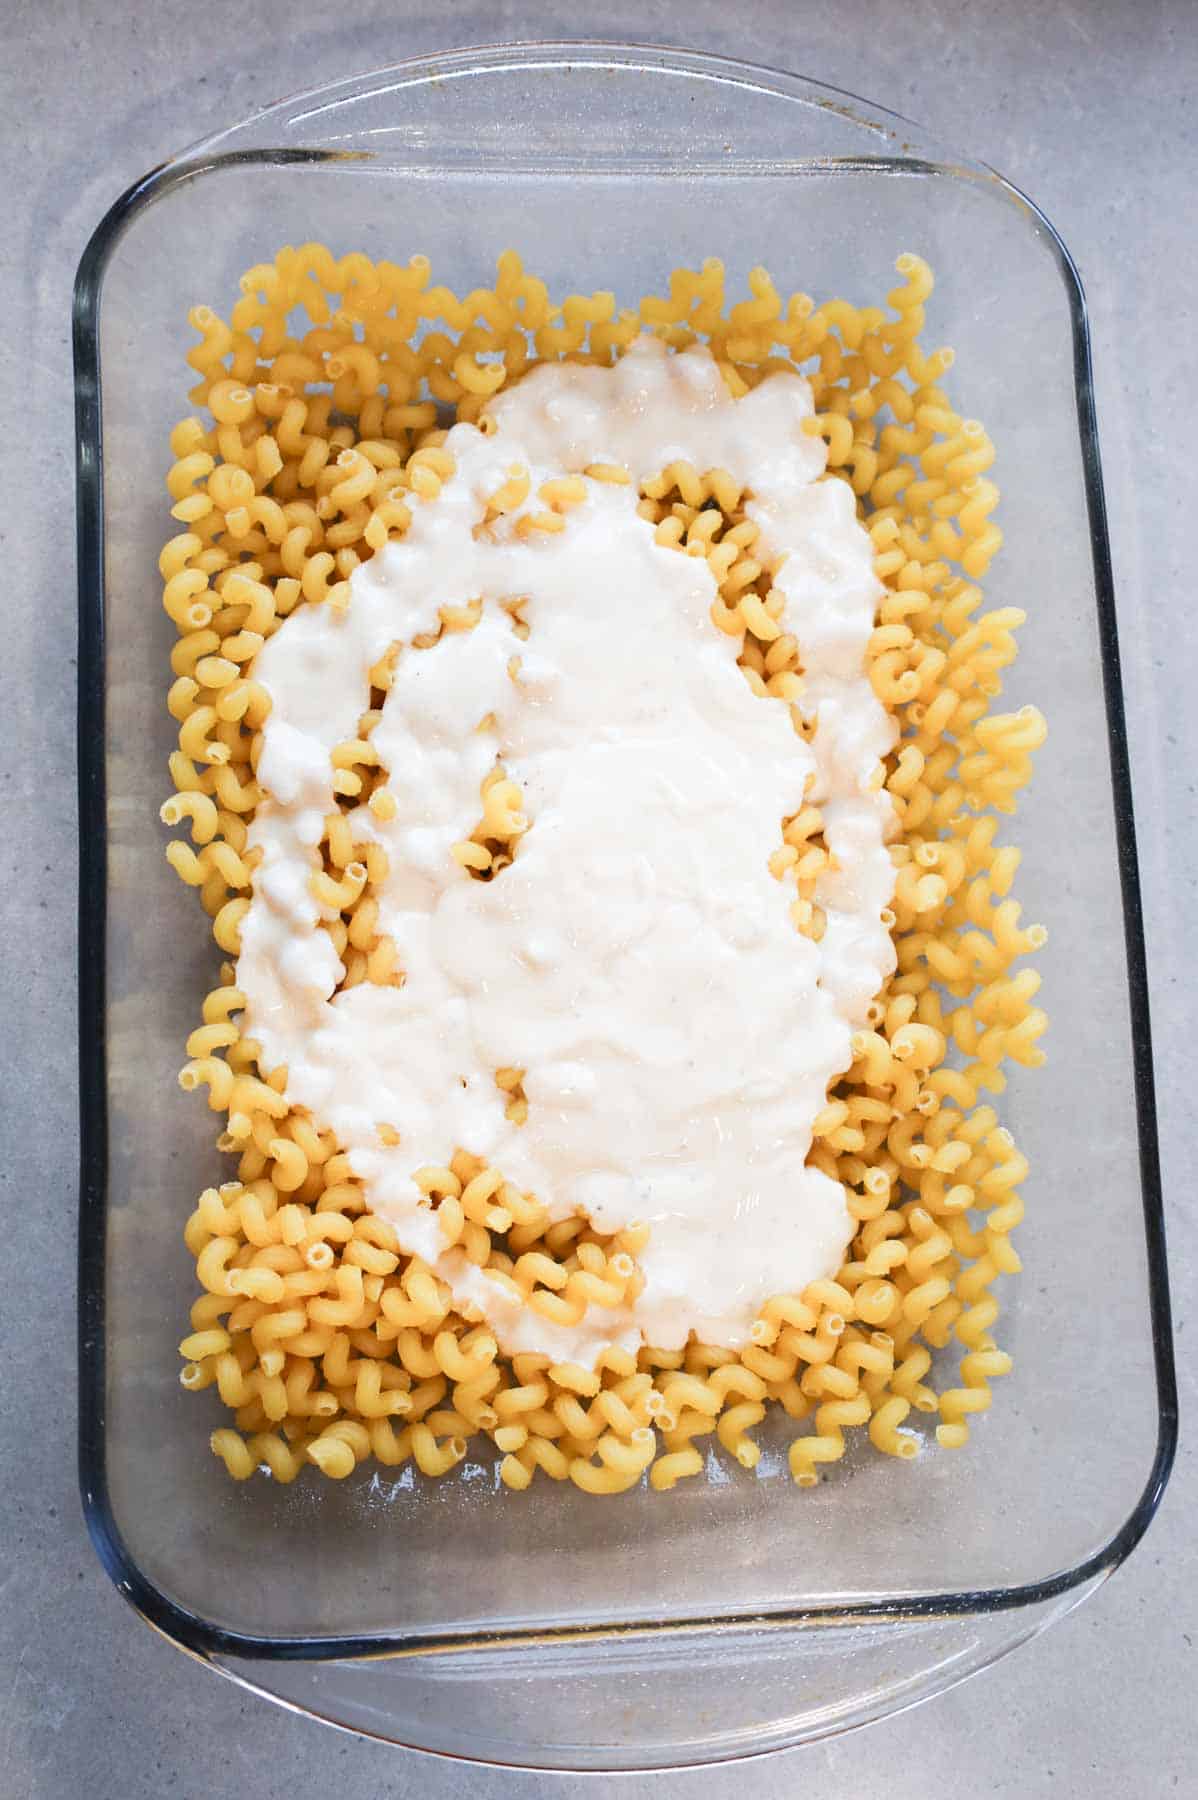 jarred alfredo sauce poured over uncooked noodles in a baking dish